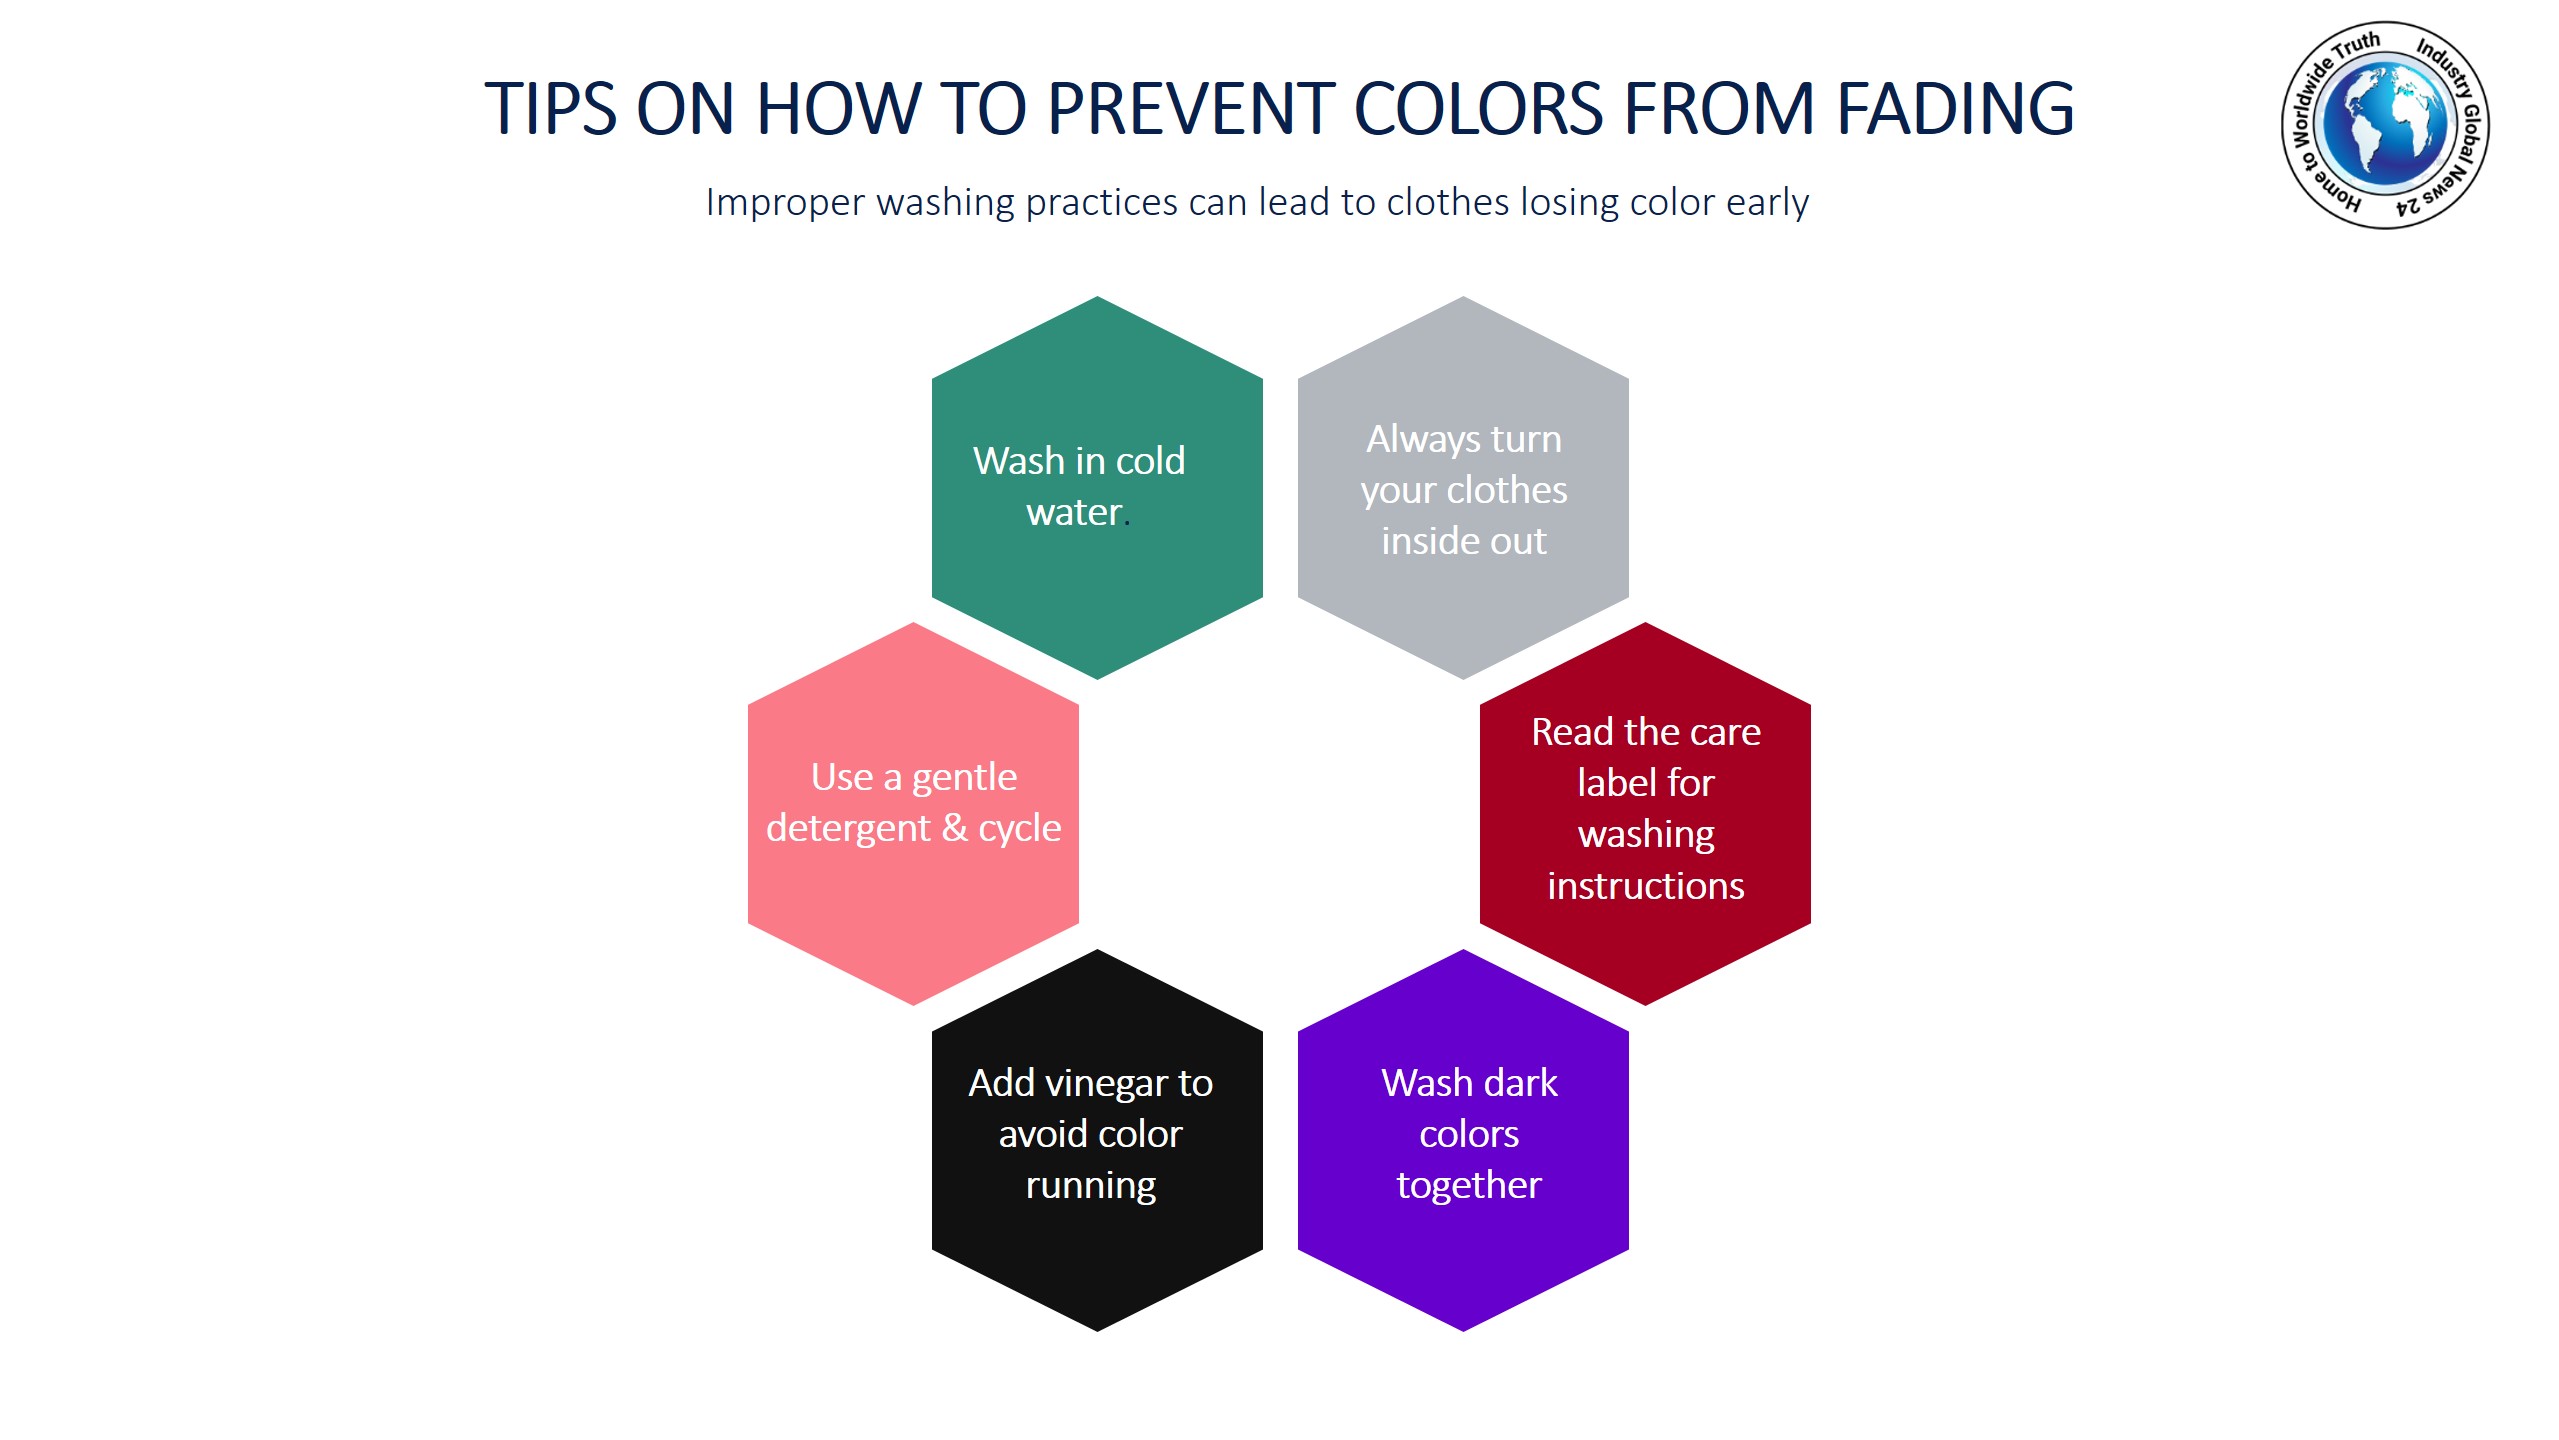 Tips on how to avoid colors from fading